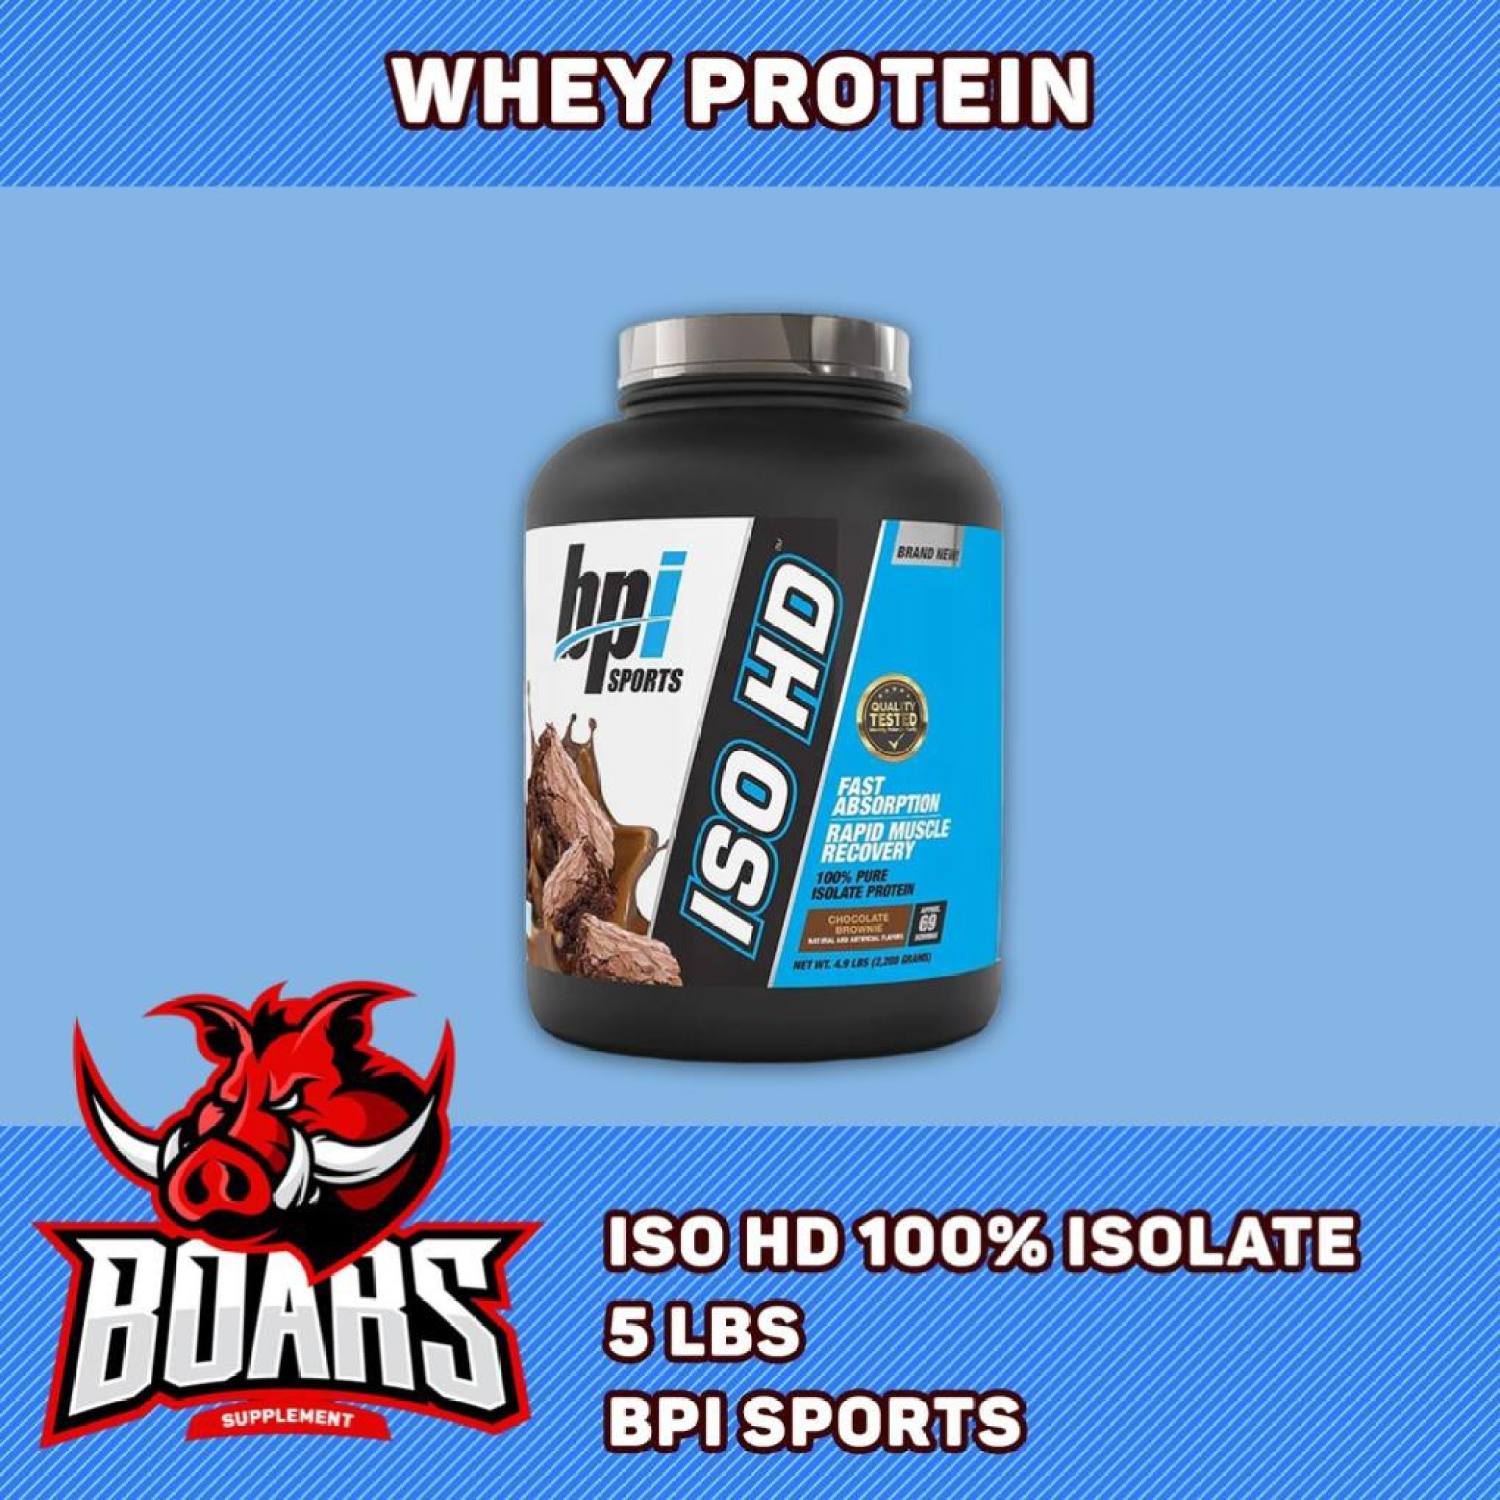 Bpi sport iso hd 100% pure isolate protein whey - ảnh sản phẩm 1